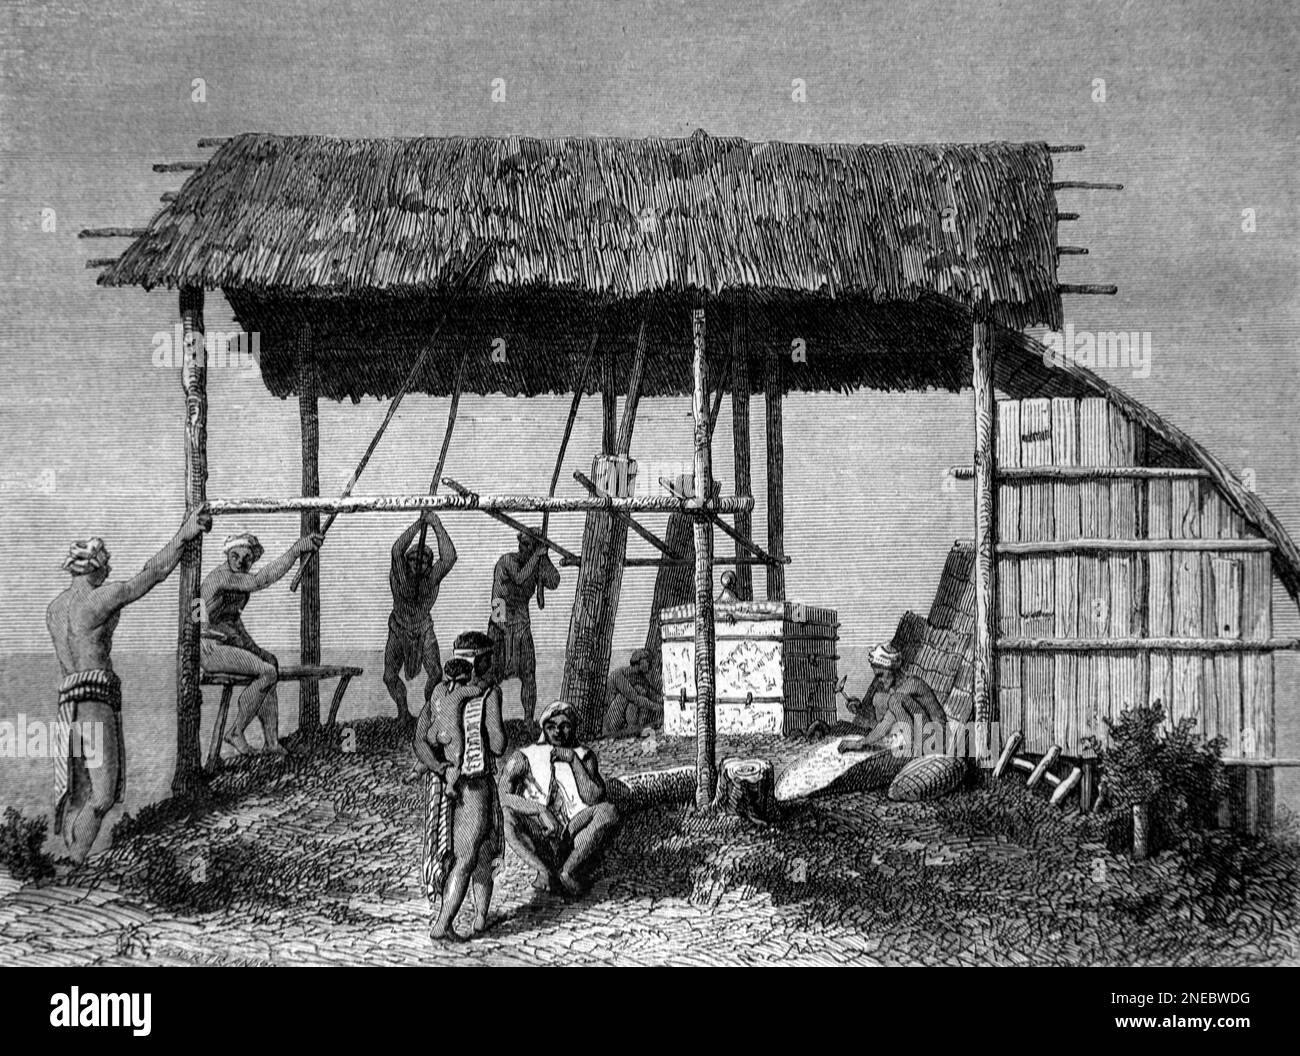 Traditional Dayak Forge, Workshop or Smithy with Grass Roof and Craftsmen Borneo. Vintage Engraving or Illustration 1862 Stock Photo